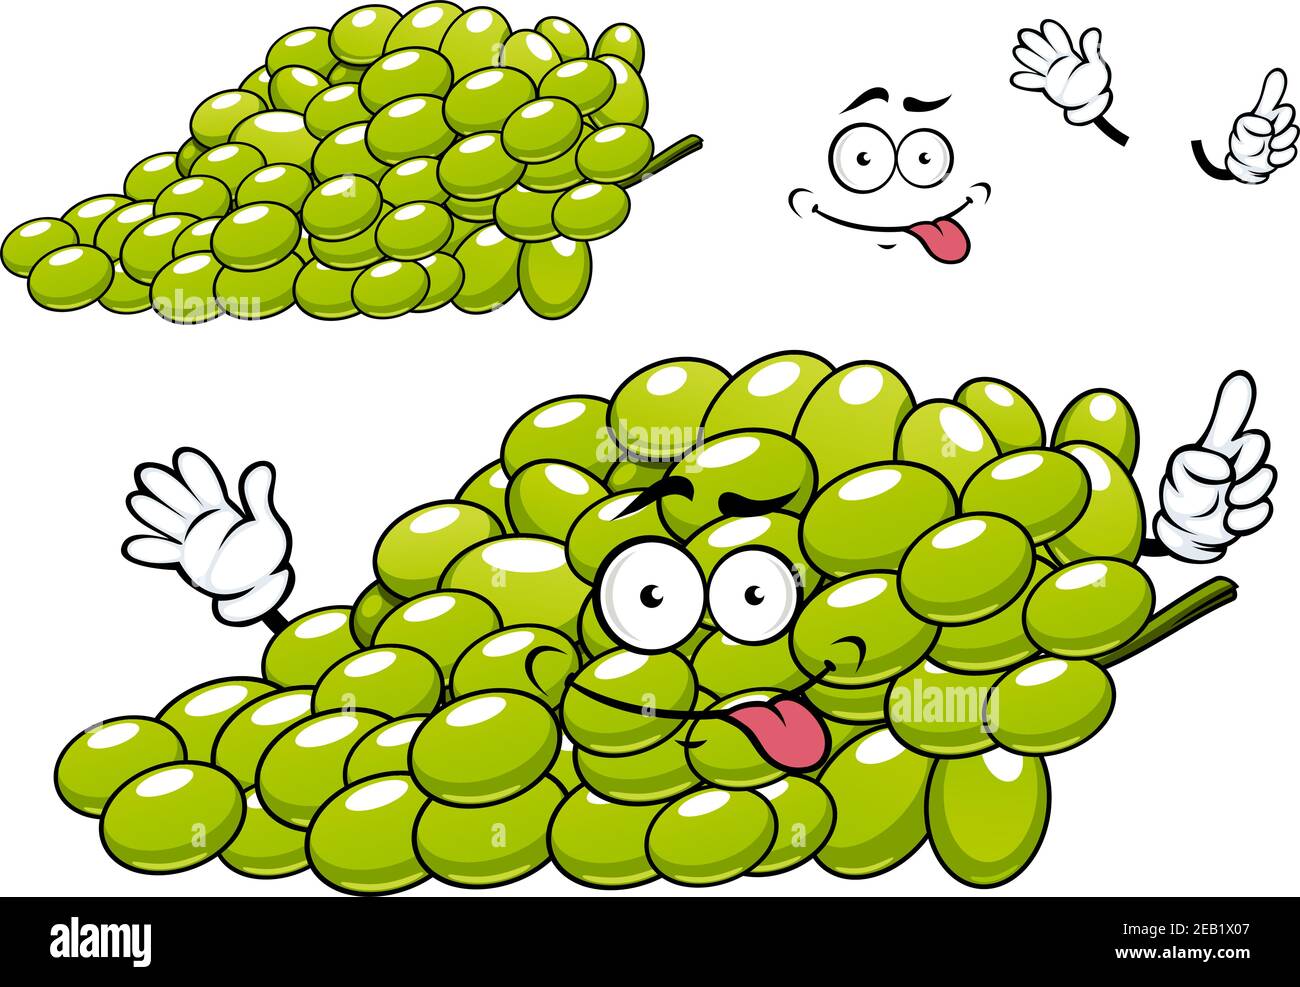 Cartoon bunch of green grape character with shiny oblong seedless berries for healthy dessert or agriculture design Stock Vector